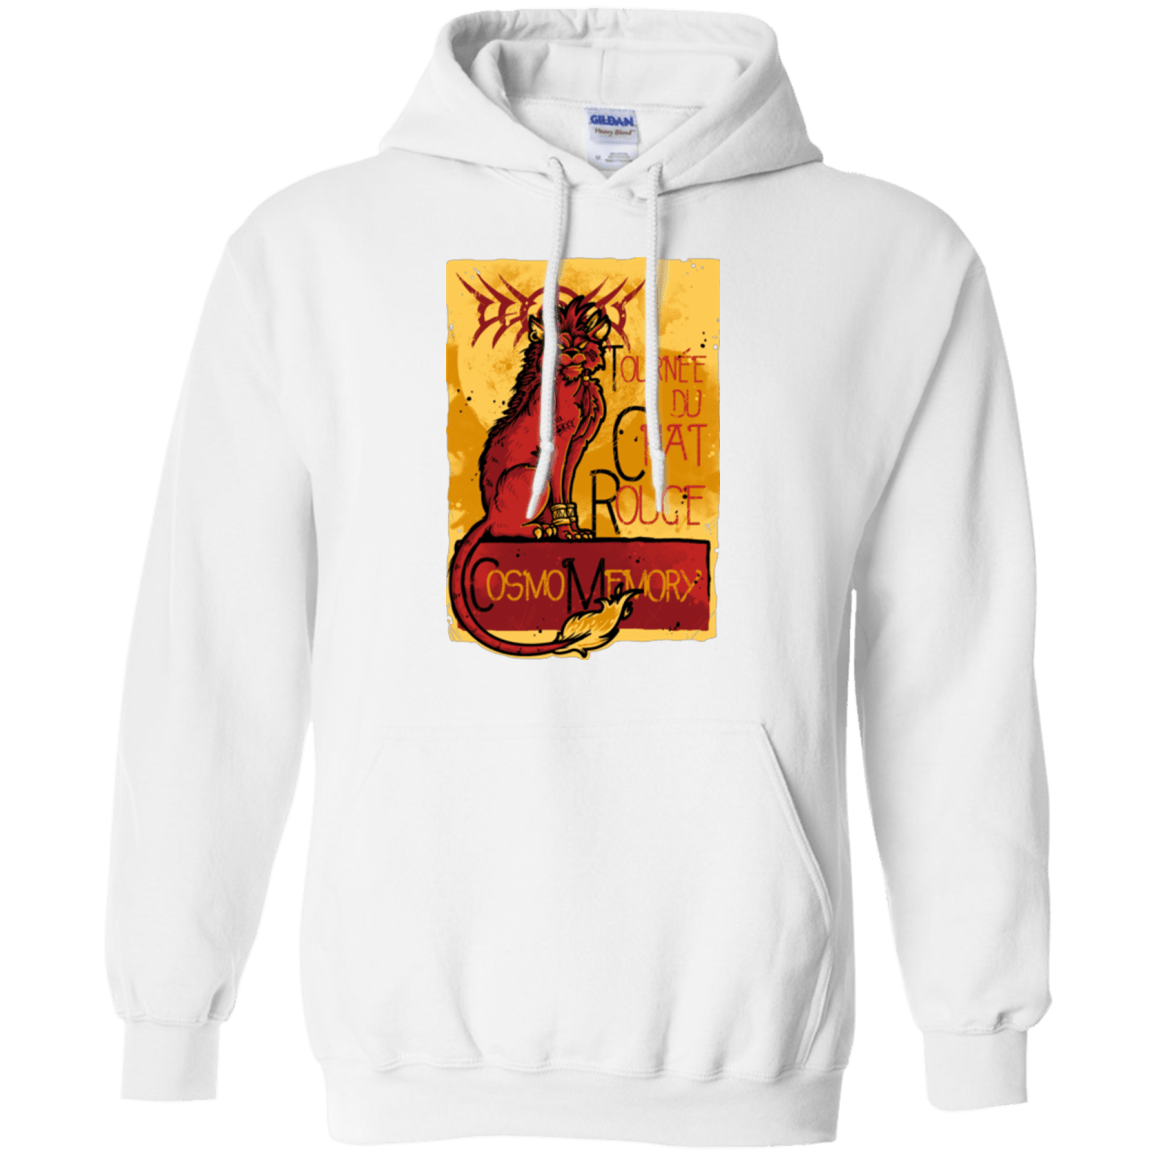 Sweatshirts White / Small LE CHAT ROUGE Pullover Hoodie